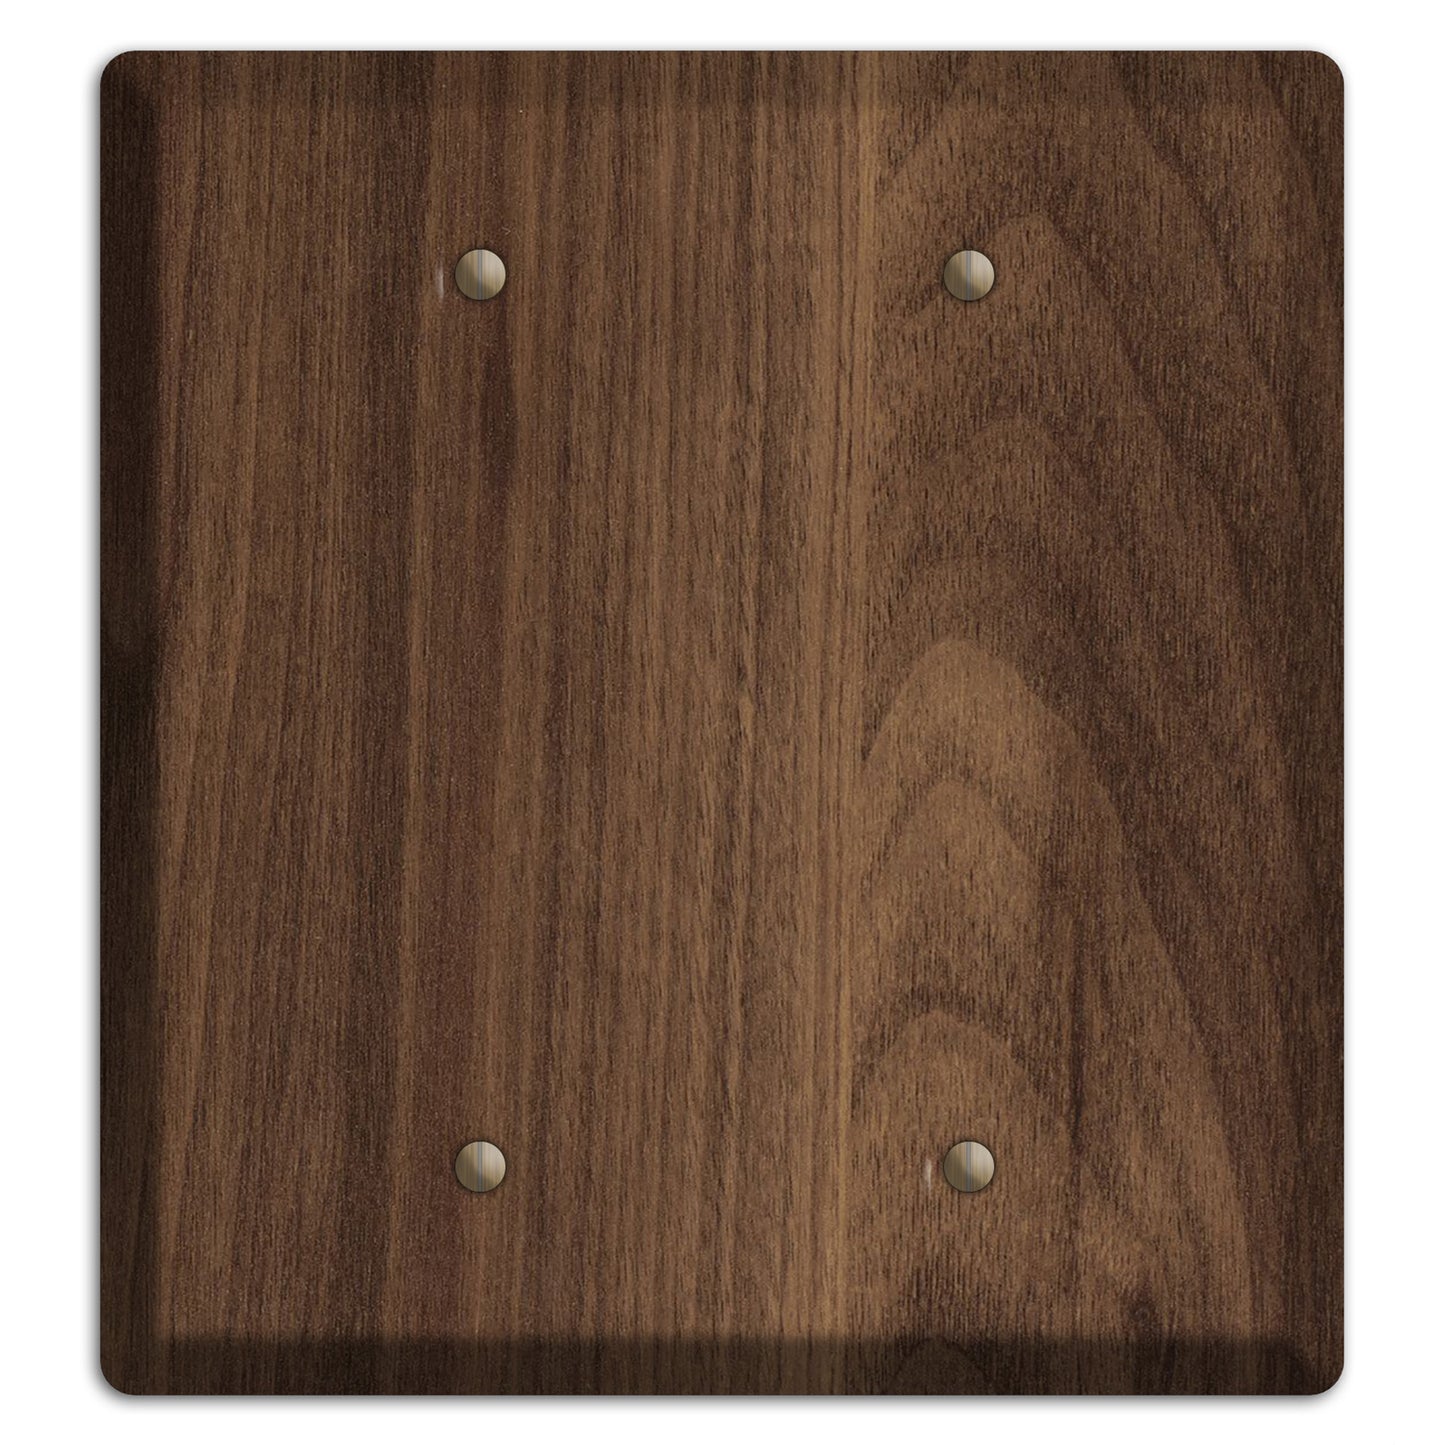 Unfinished Walnut Wood Double Blank Cover Plate